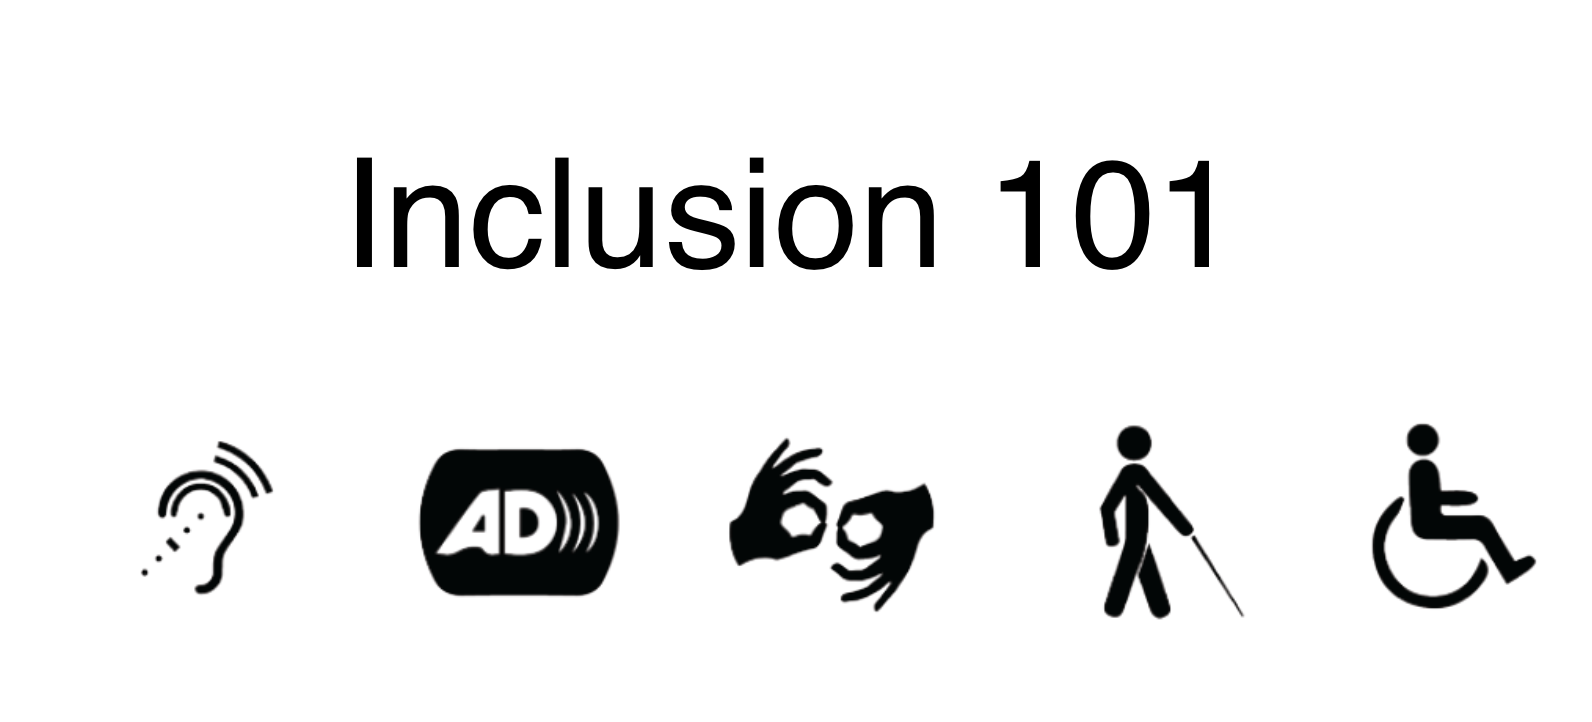 Inclusion 1010 - underneath are the images for different disability types.